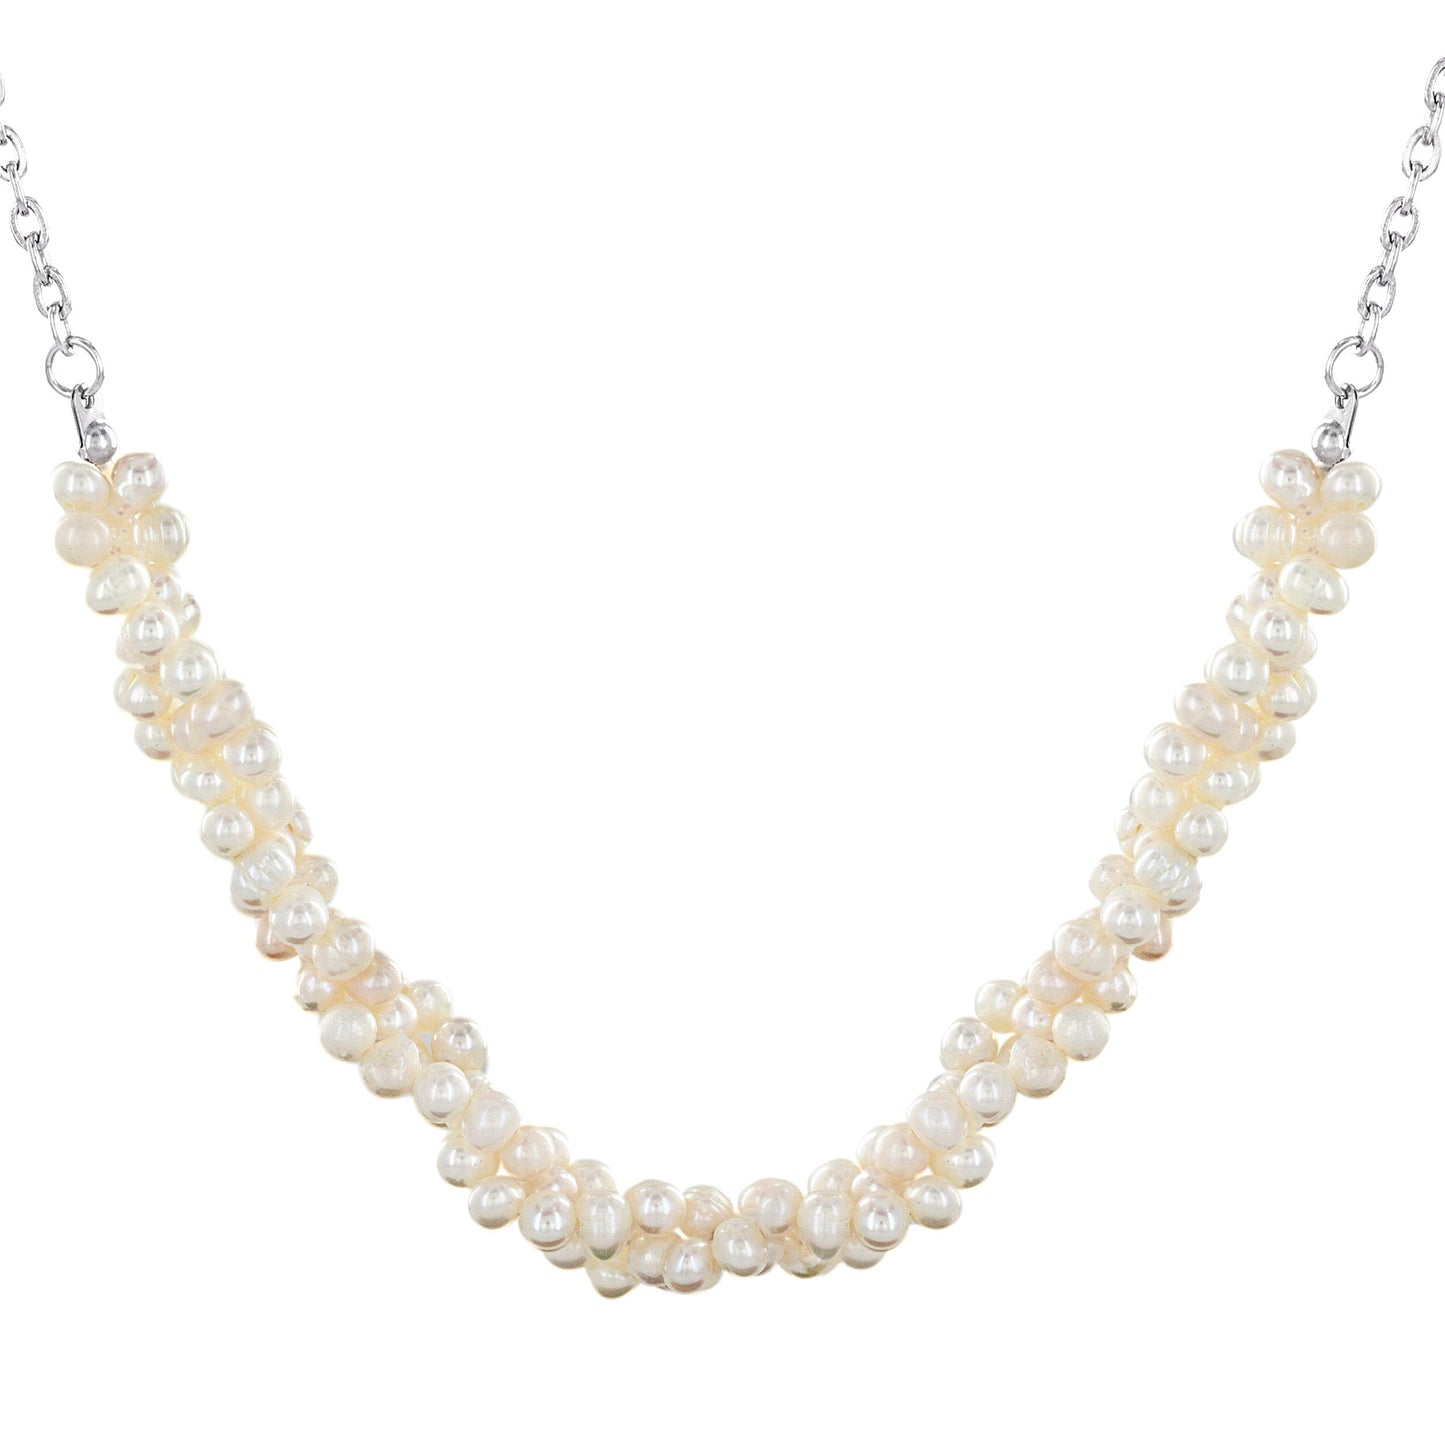 ELYA Polished Freshwater Pearl Braided Stainless Steel Necklace (4-5 mm) - 16"